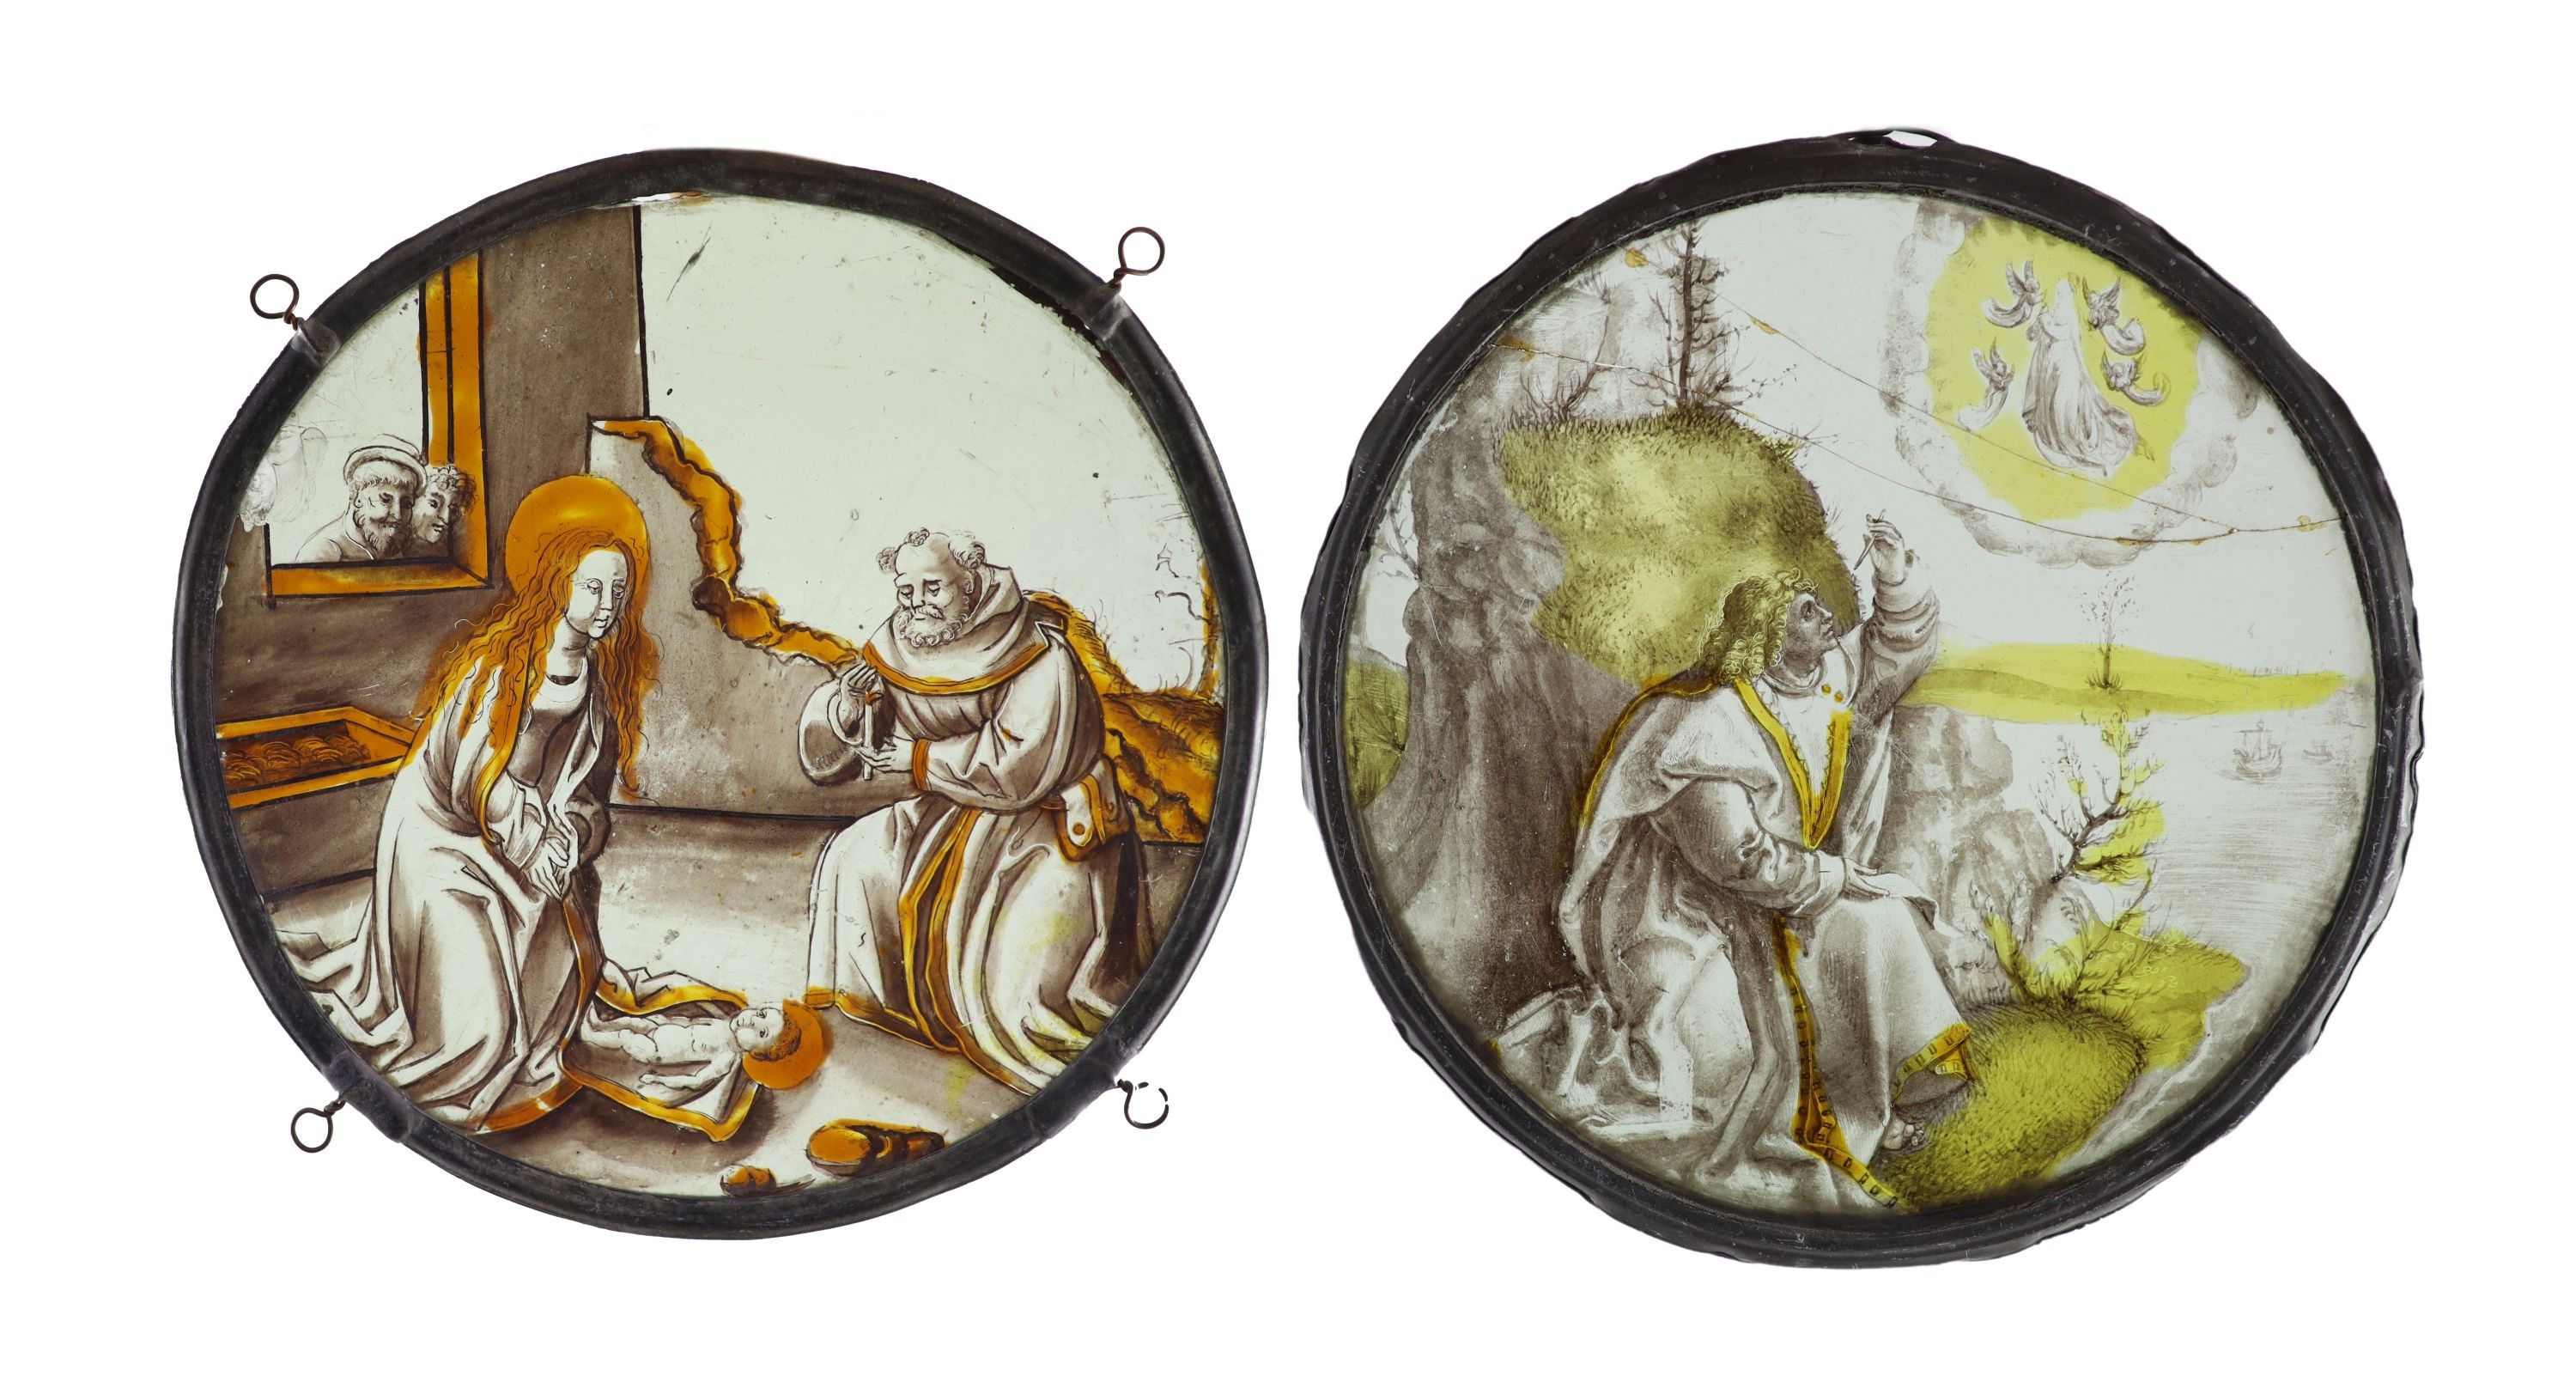 Two 16th century Netherlandish stained glass roundels, ‘’The Nativity’’ and ‘’St. John on Patmos, 23 and 24.5 cm diameter